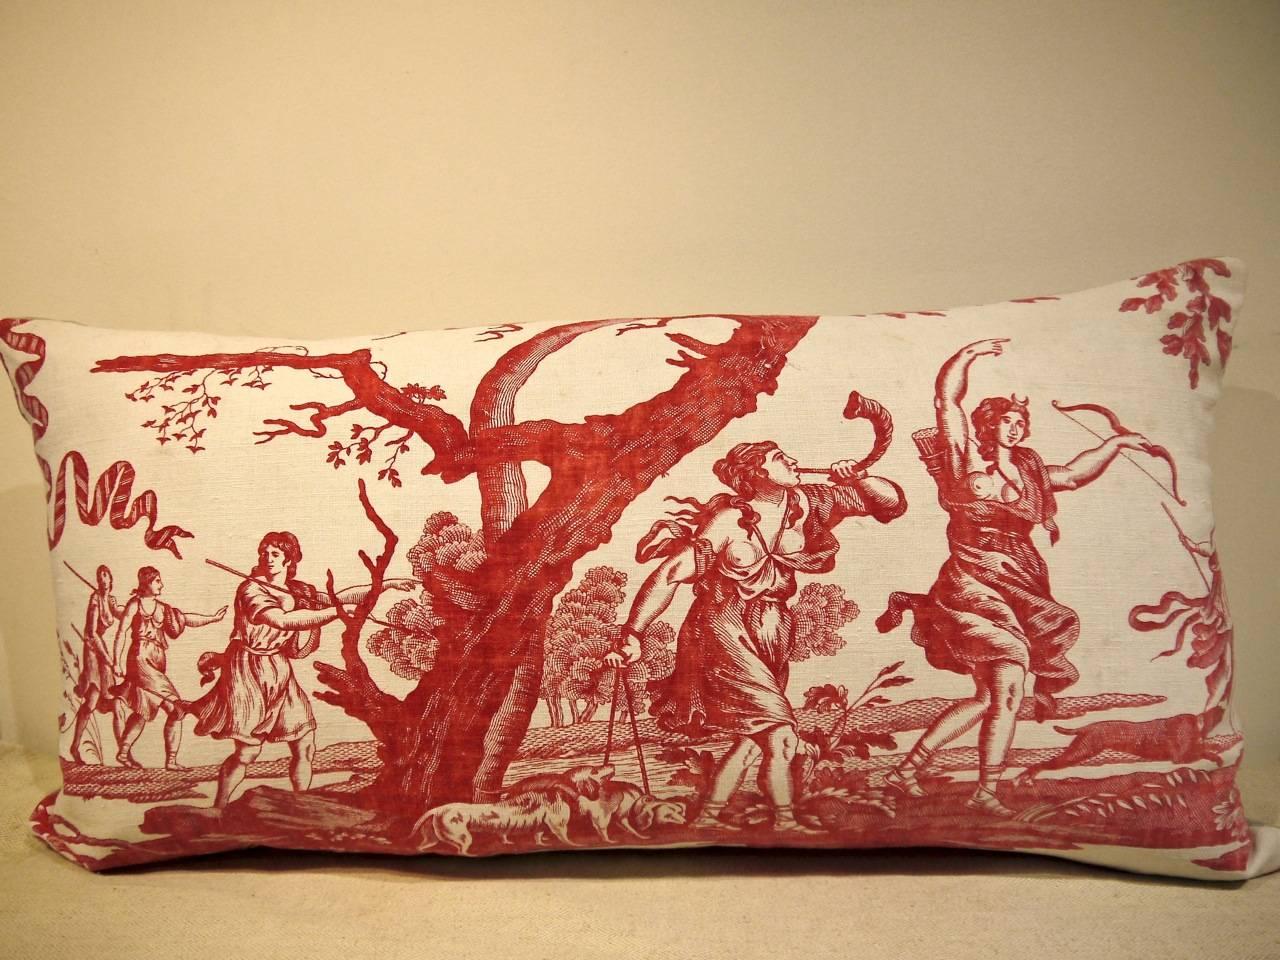 French Toile de Nantes of Diane the huntress printed on cotton cushion, circa 1785. Backed in a 19th century beige linen. Slip stitched closed with a duck feather insert.